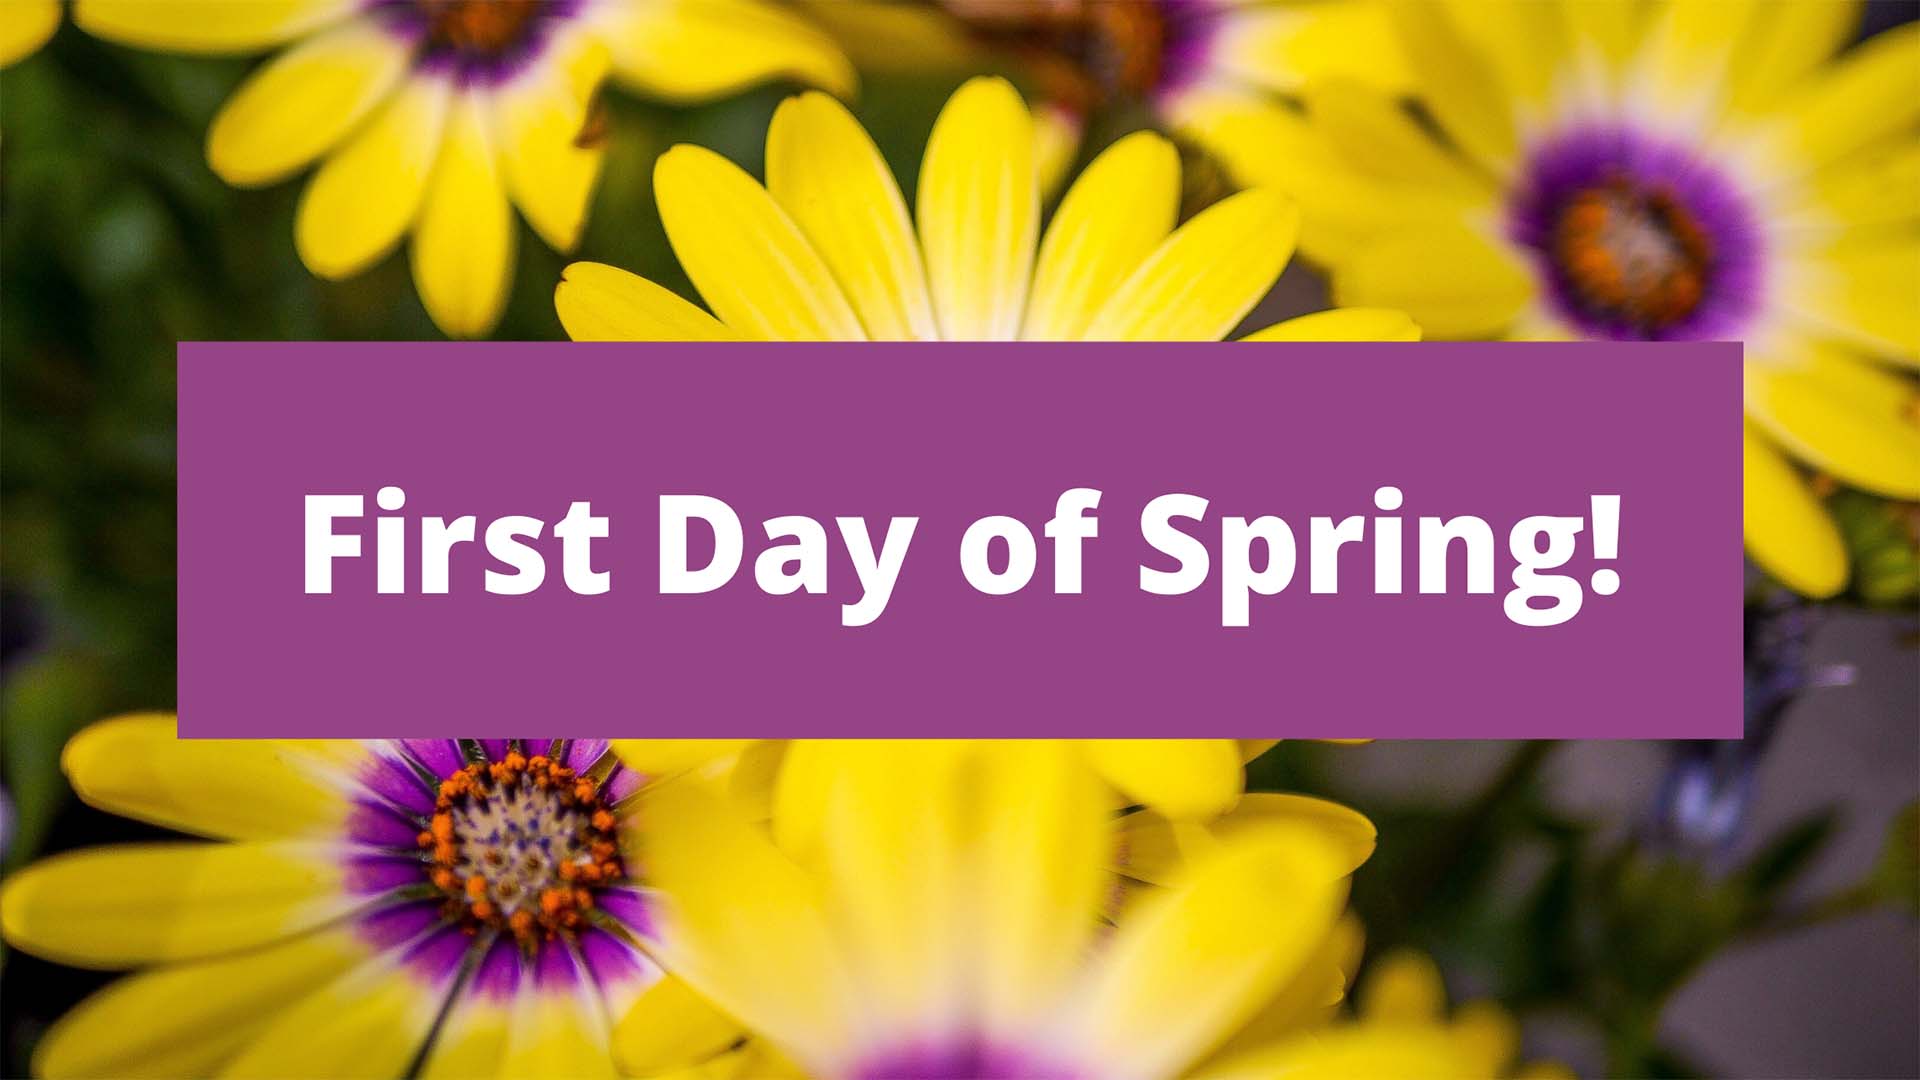 Photo of yellow and purple daisy flowers with a purple rectangle in the middle of the graphic reading "First Day of Spring!"